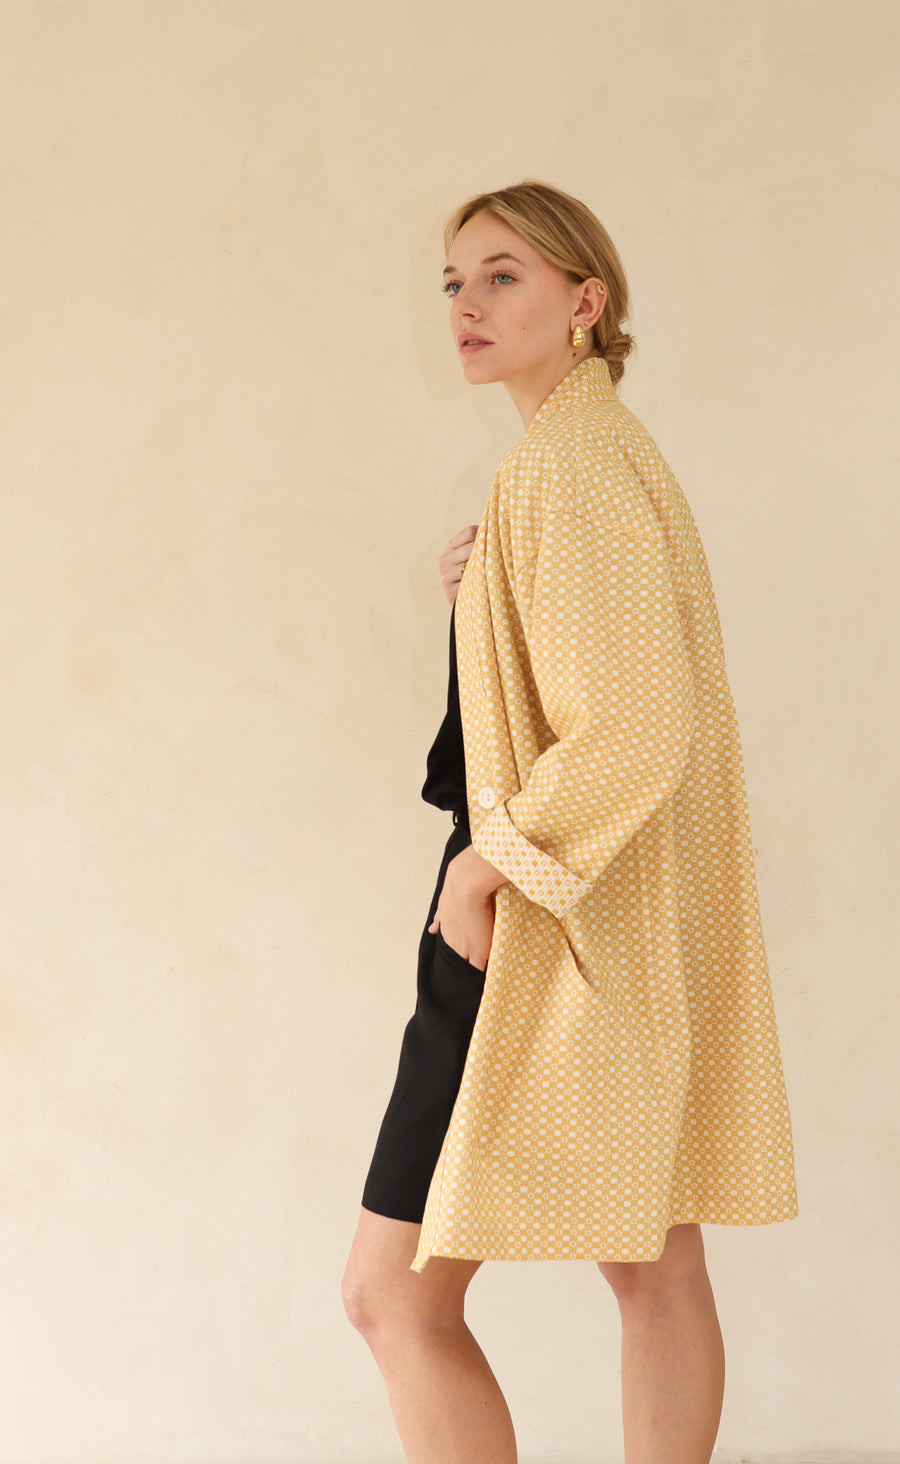 The Admirer - Long Sleeve Duster Coat - Cotton Jacquard